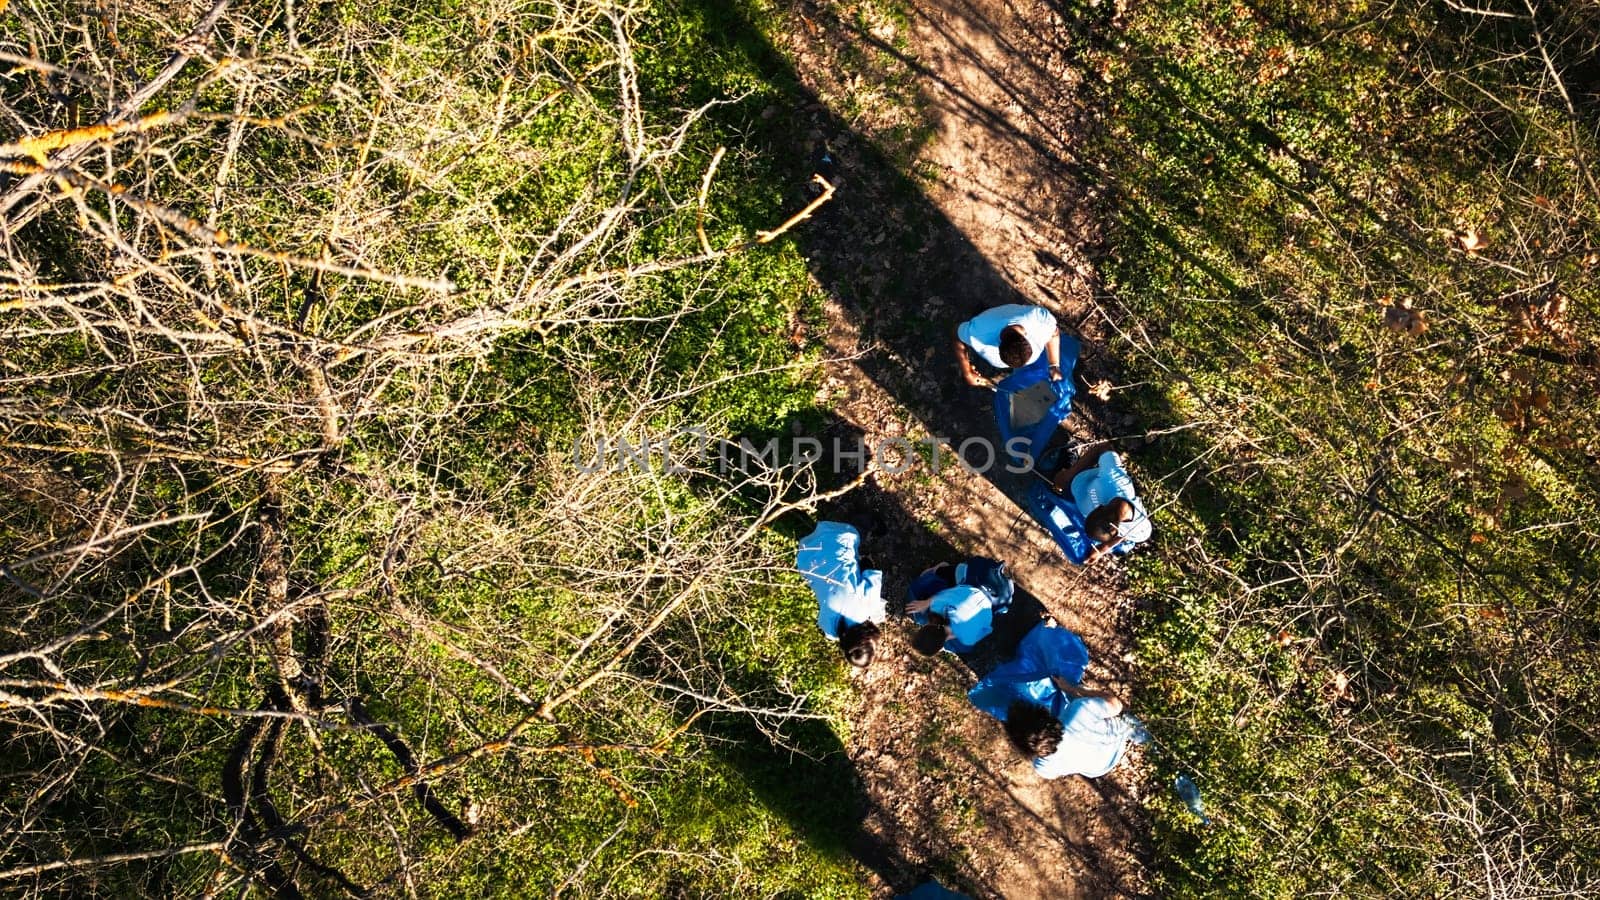 Drone shot of activists team cleaning and recycling garbage in a forest, working on clearing up the woods area for environmental protection. People with ecologic preservation values.